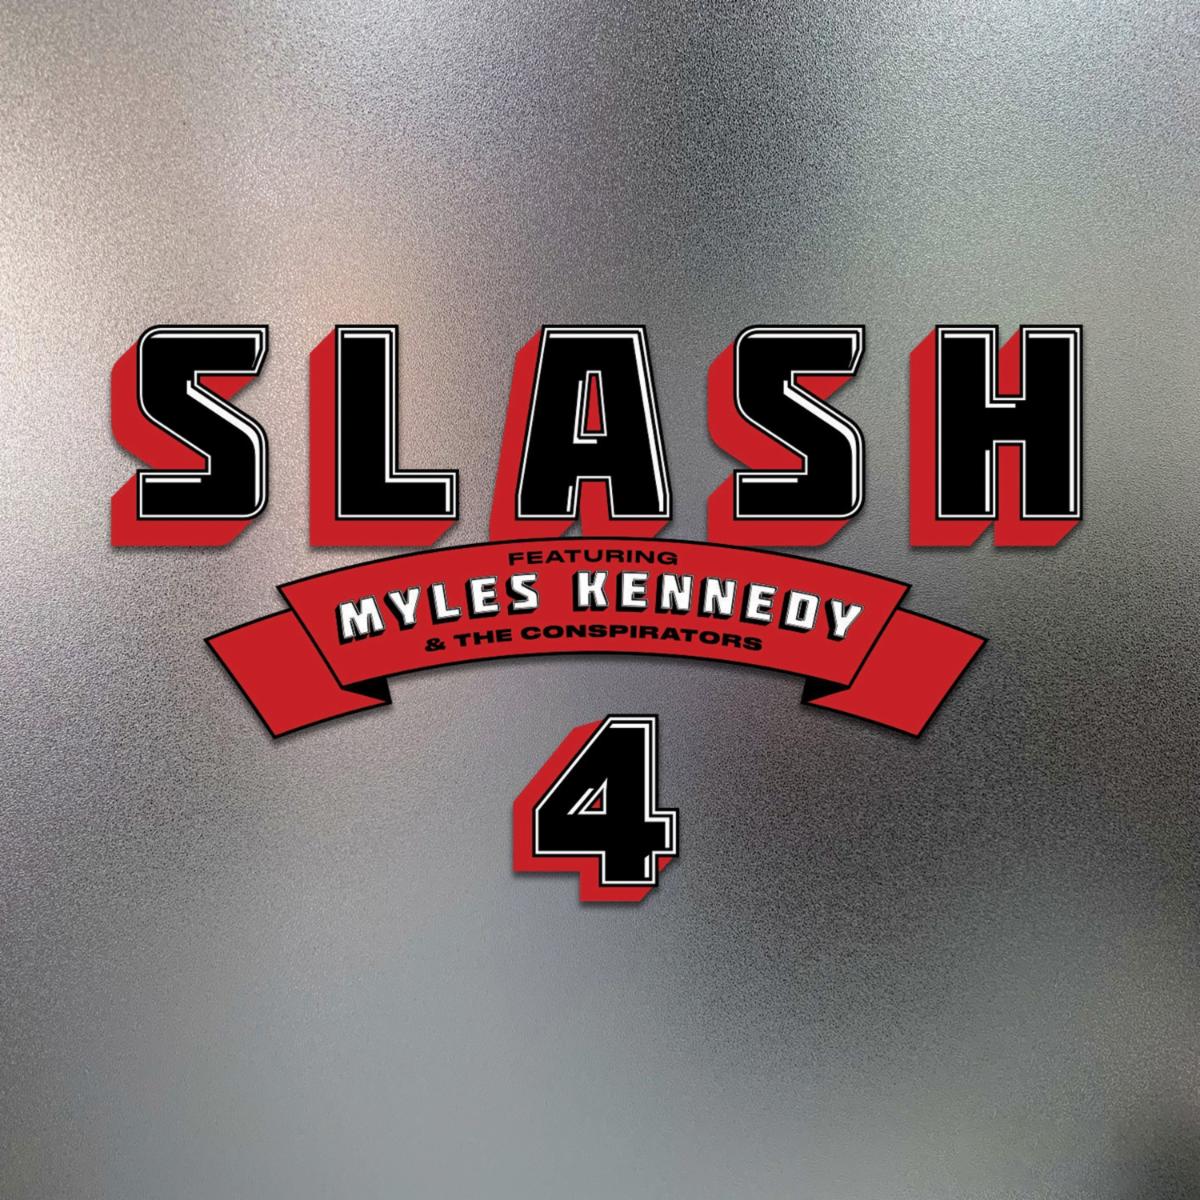 Slash Ft. Myles Kennedy and the Conspirators - Release New Song "Call Off The Dogs" Today; New Album Titled ‘4’ Out February 11, on Gibson Records